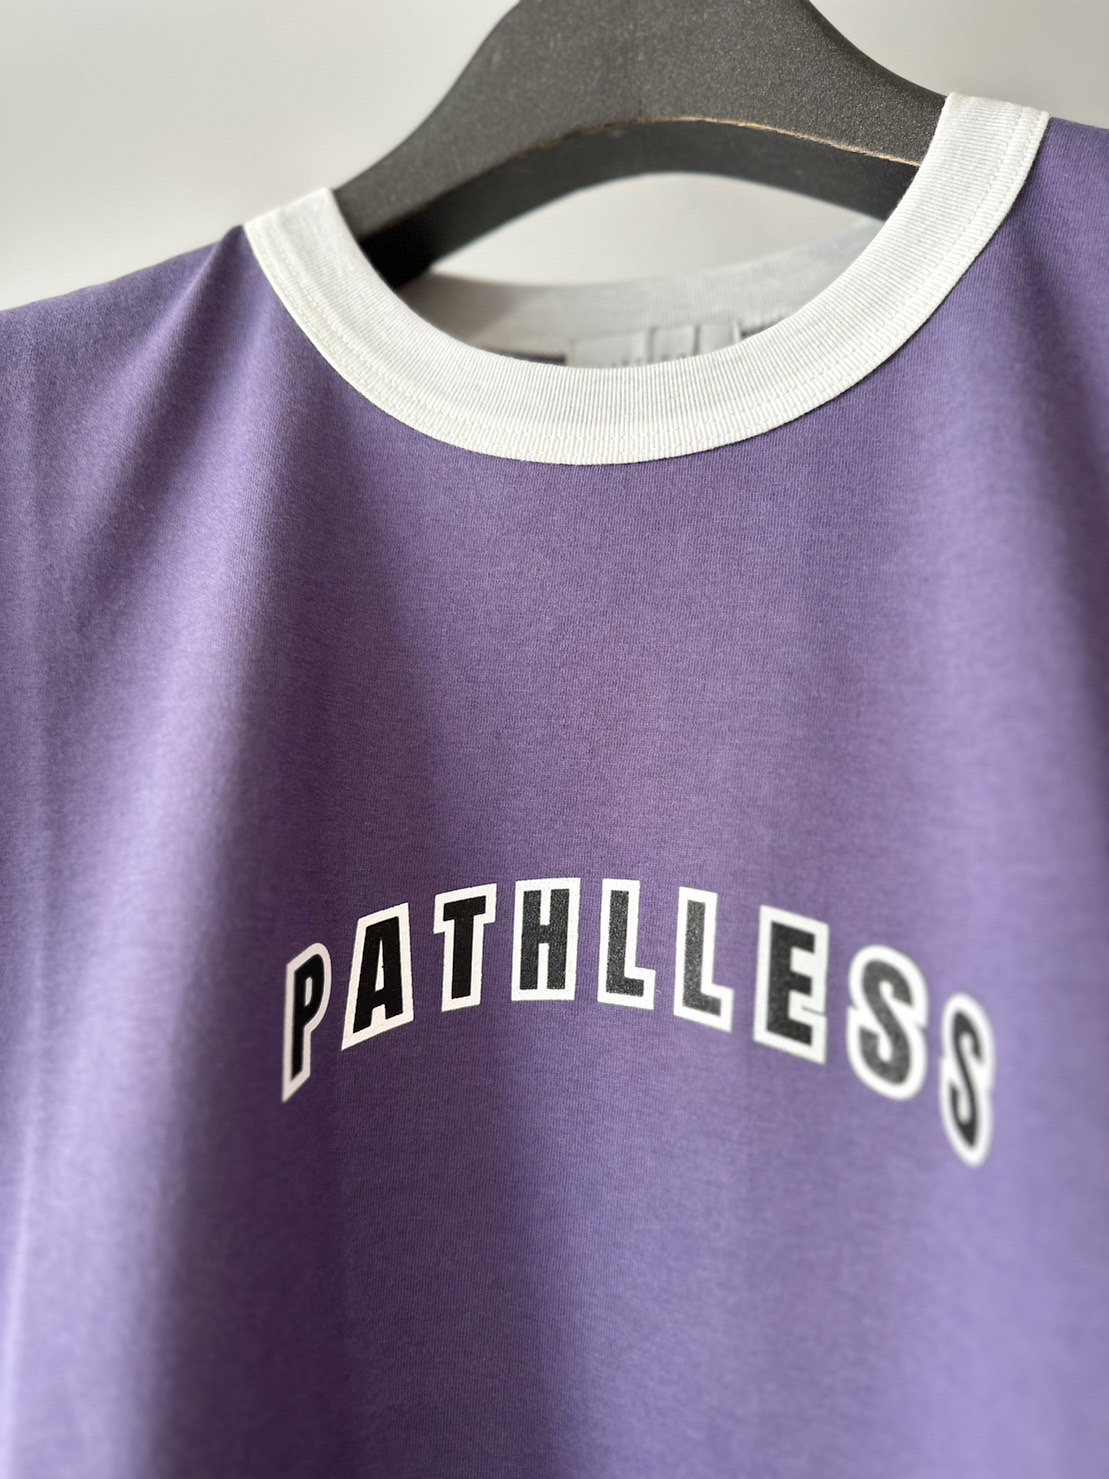 LITTLEBIG<br />PATHLESS TS / Purple  <img class='new_mark_img2' src='https://img.shop-pro.jp/img/new/icons14.gif' style='border:none;display:inline;margin:0px;padding:0px;width:auto;' />